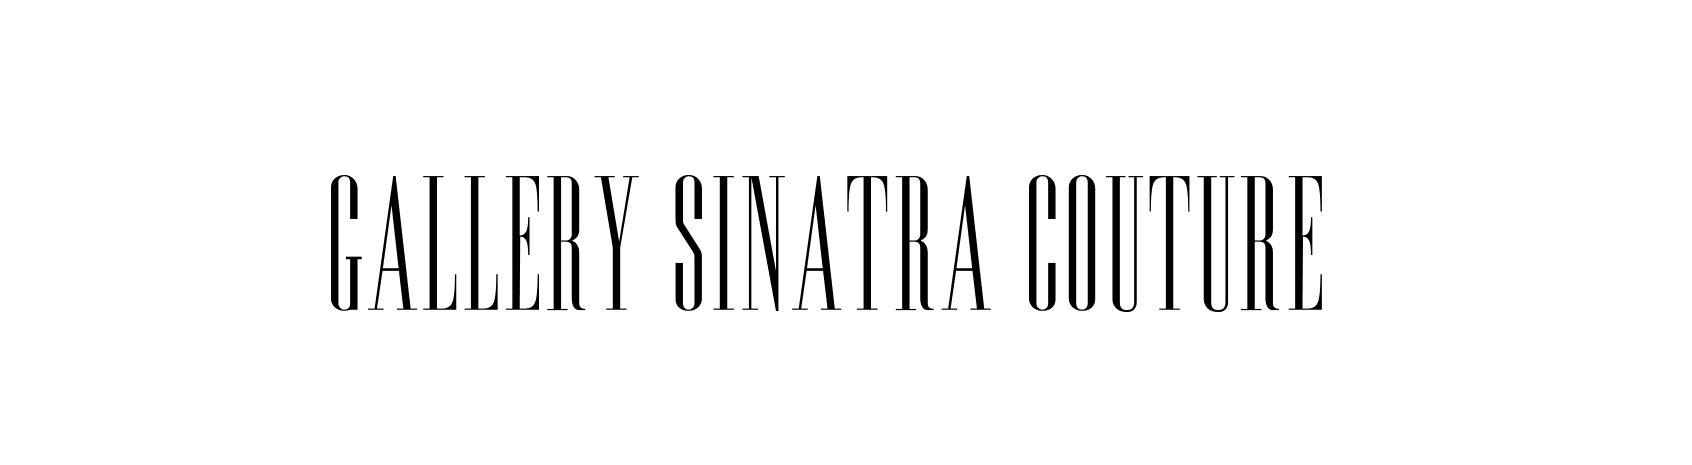 SinatraCouture 橫幅